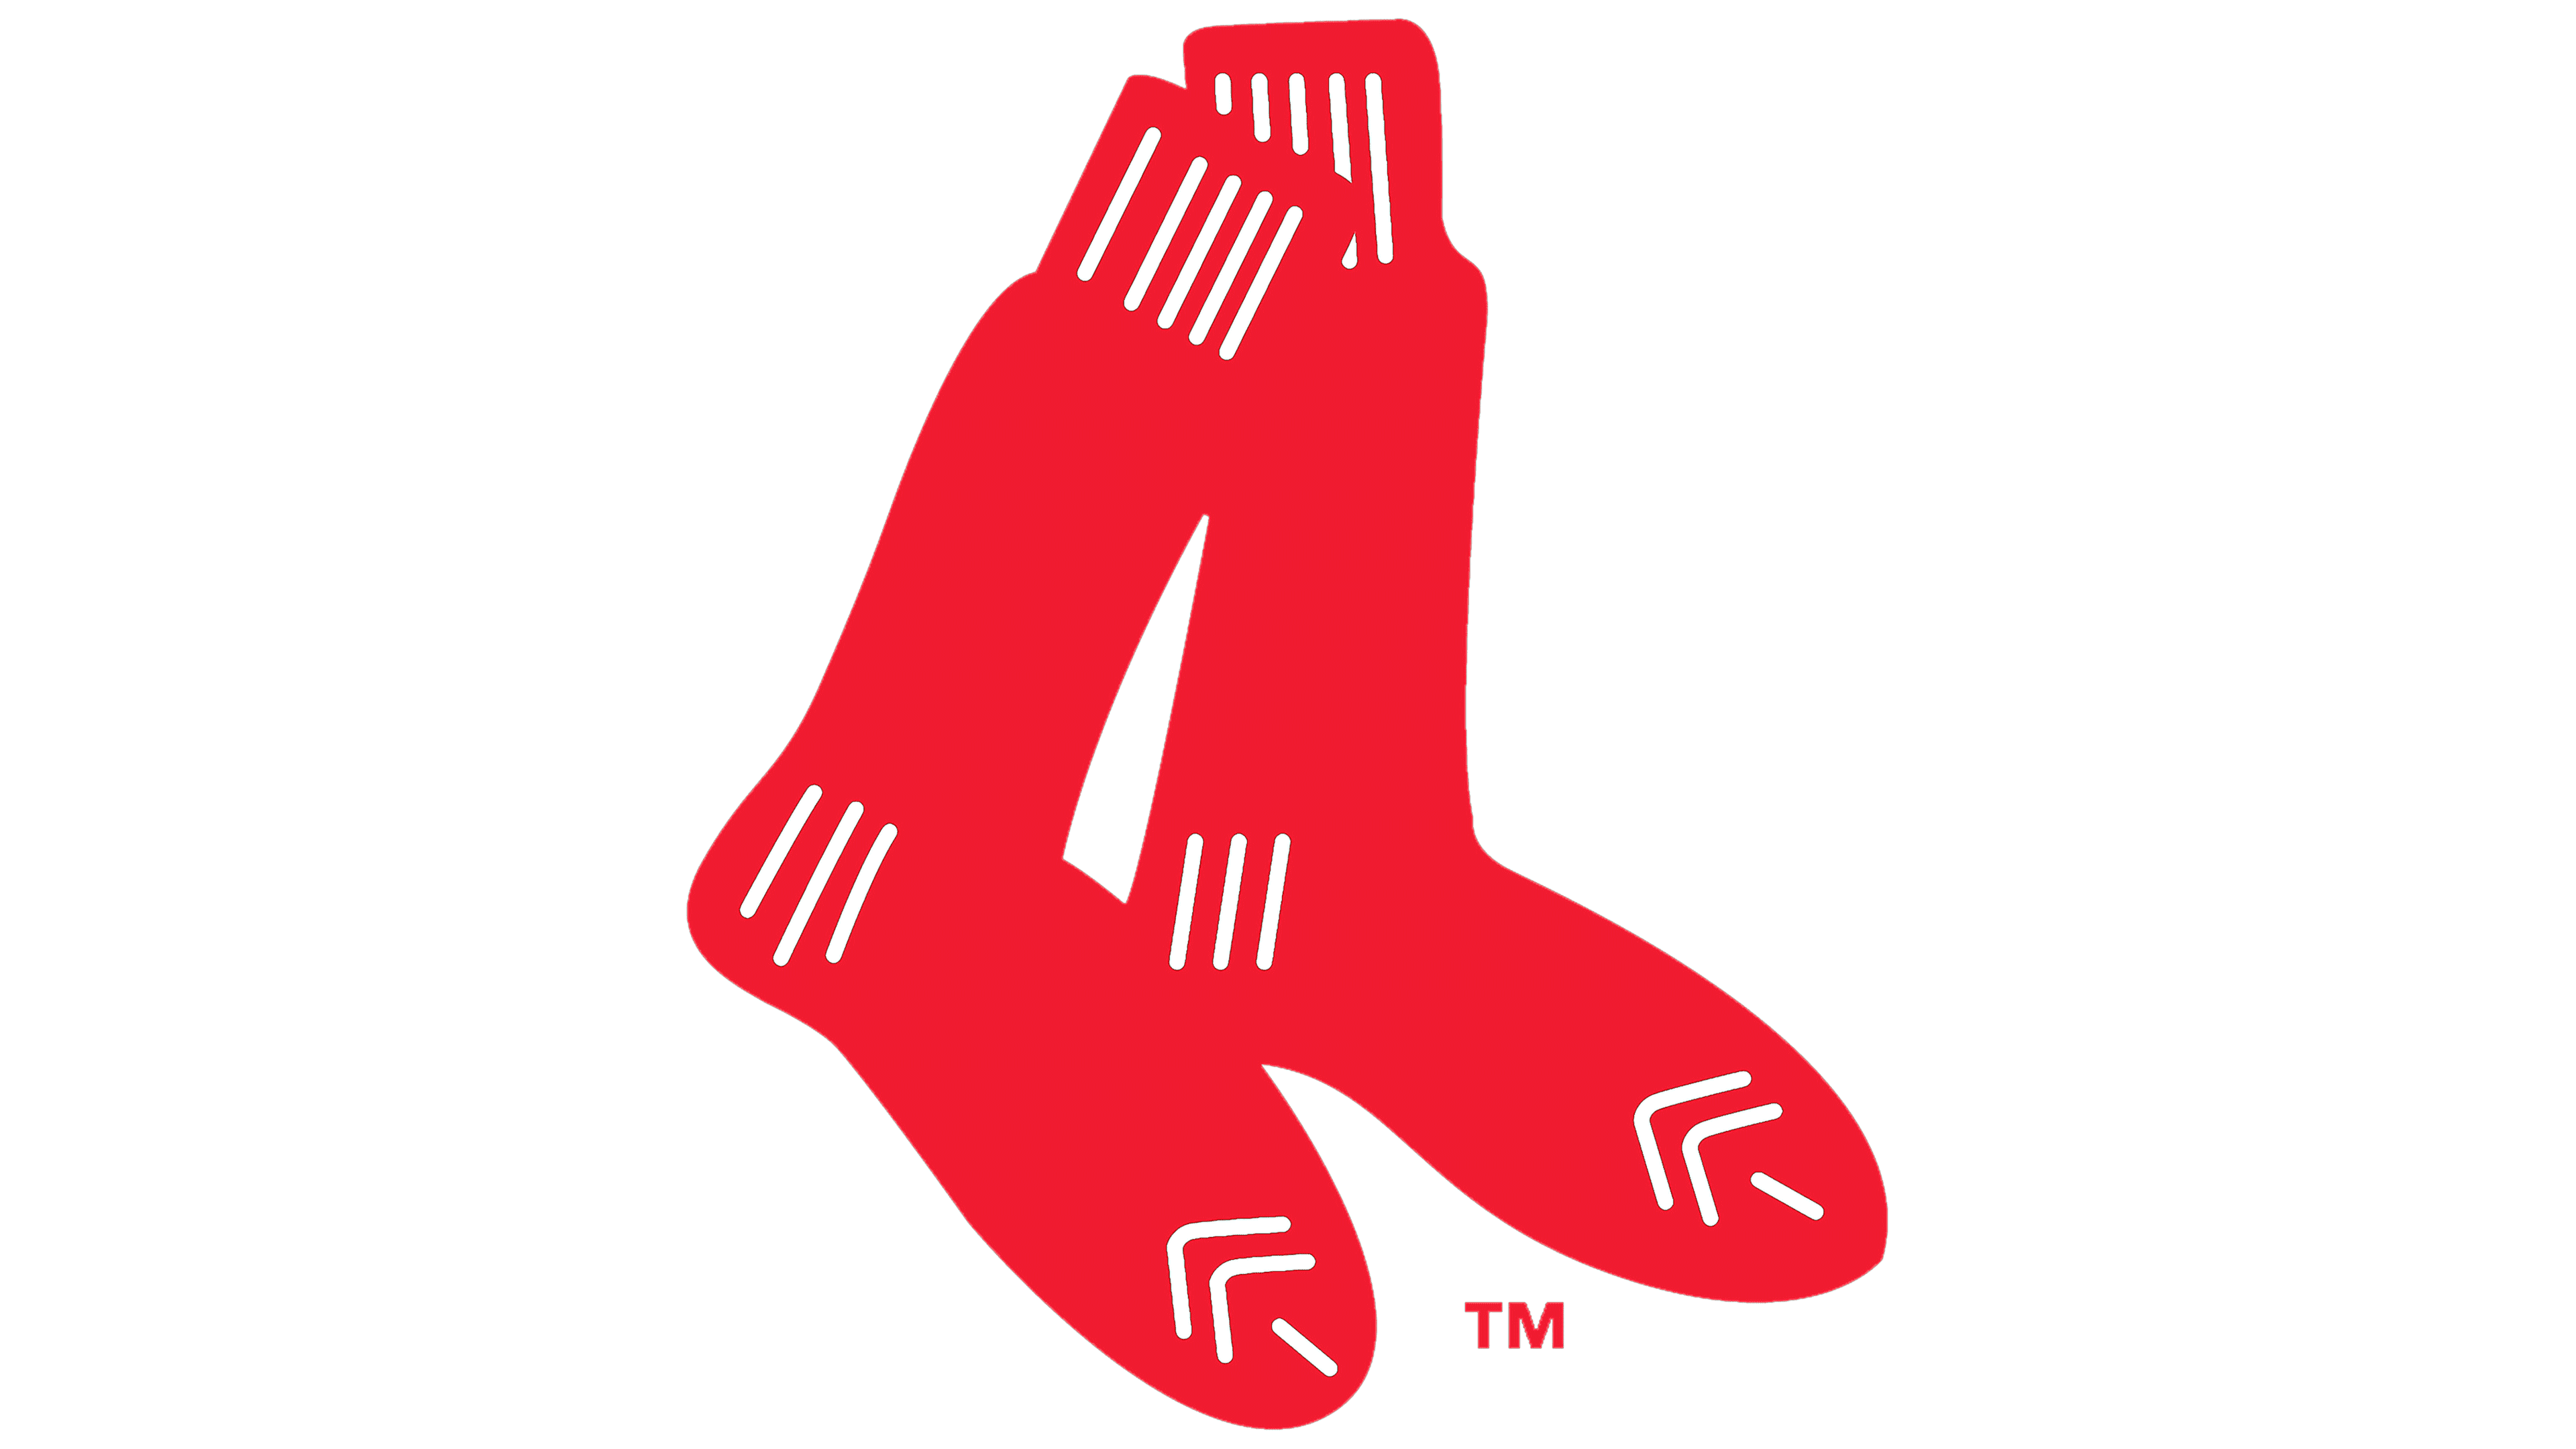 A history of Boston Red Sox logos throughout the years